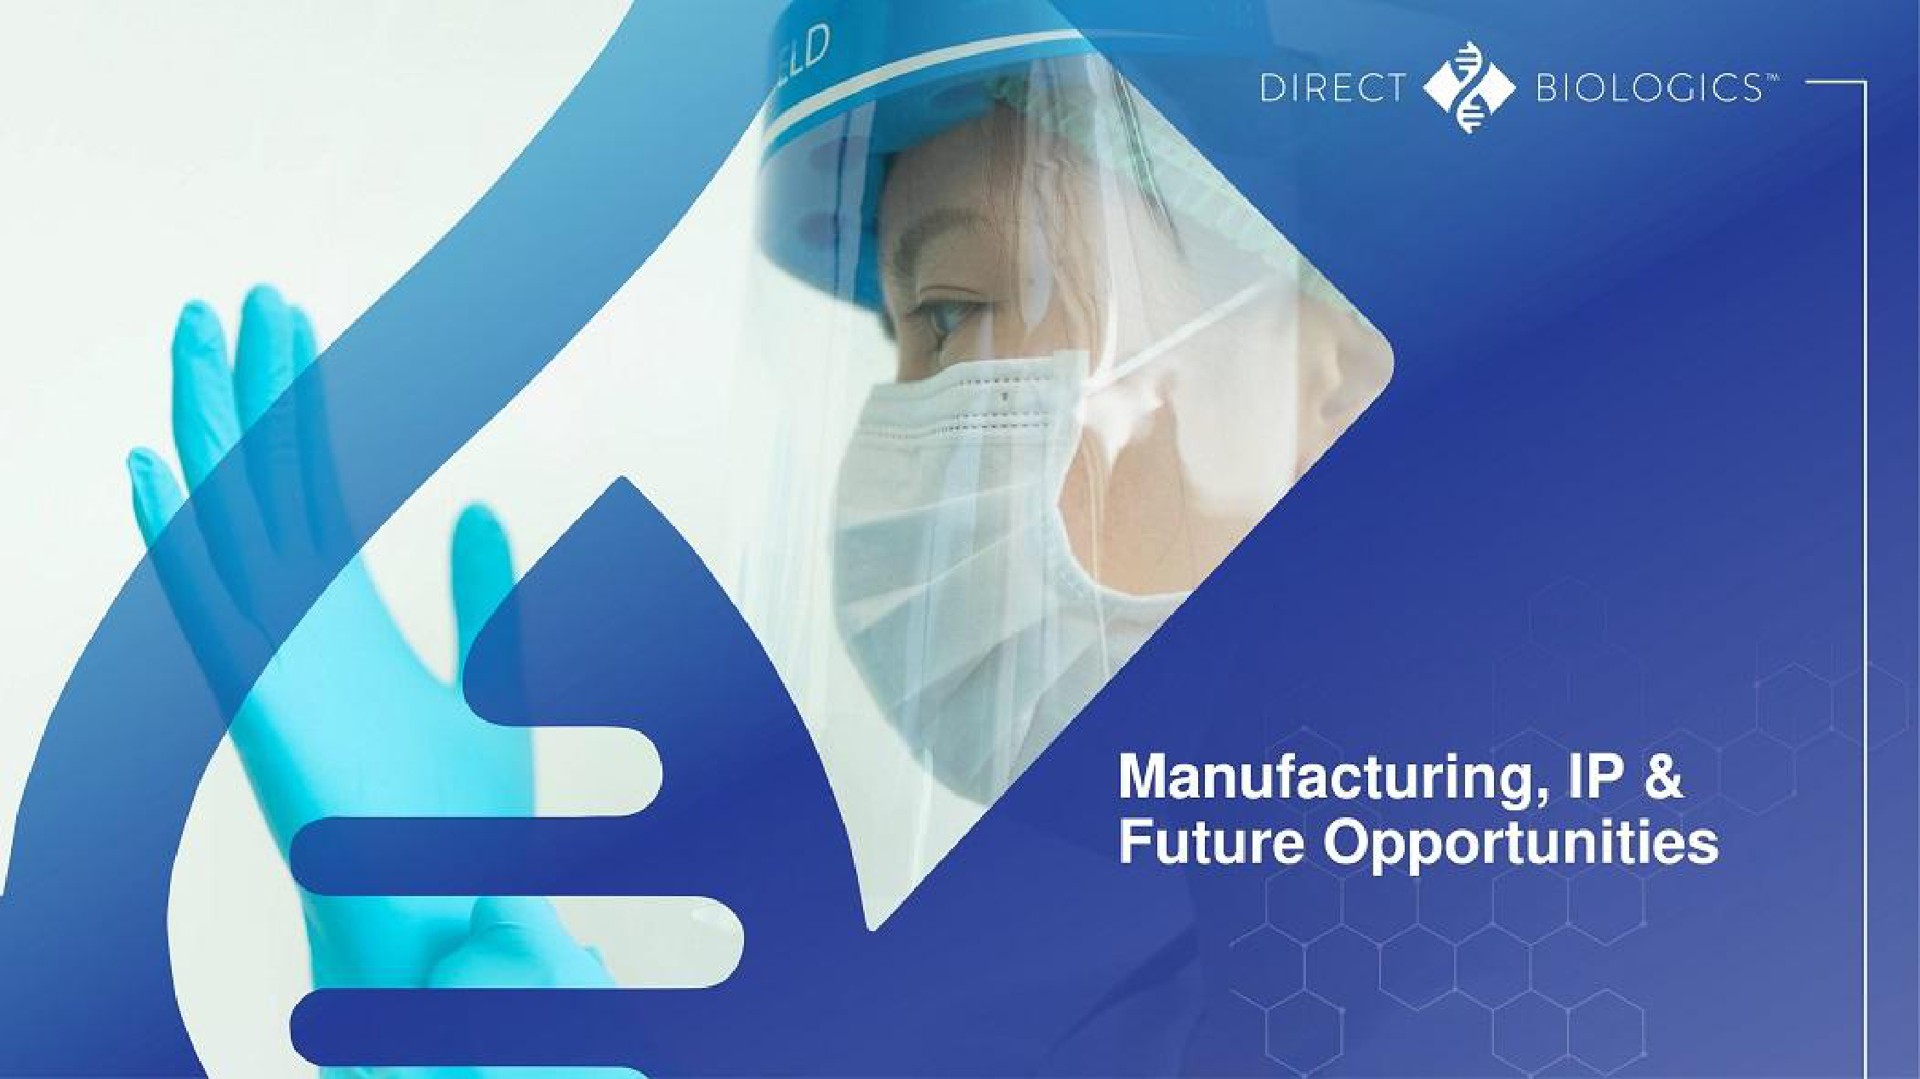 direct manufacturing future opportunities | Direct Biologics